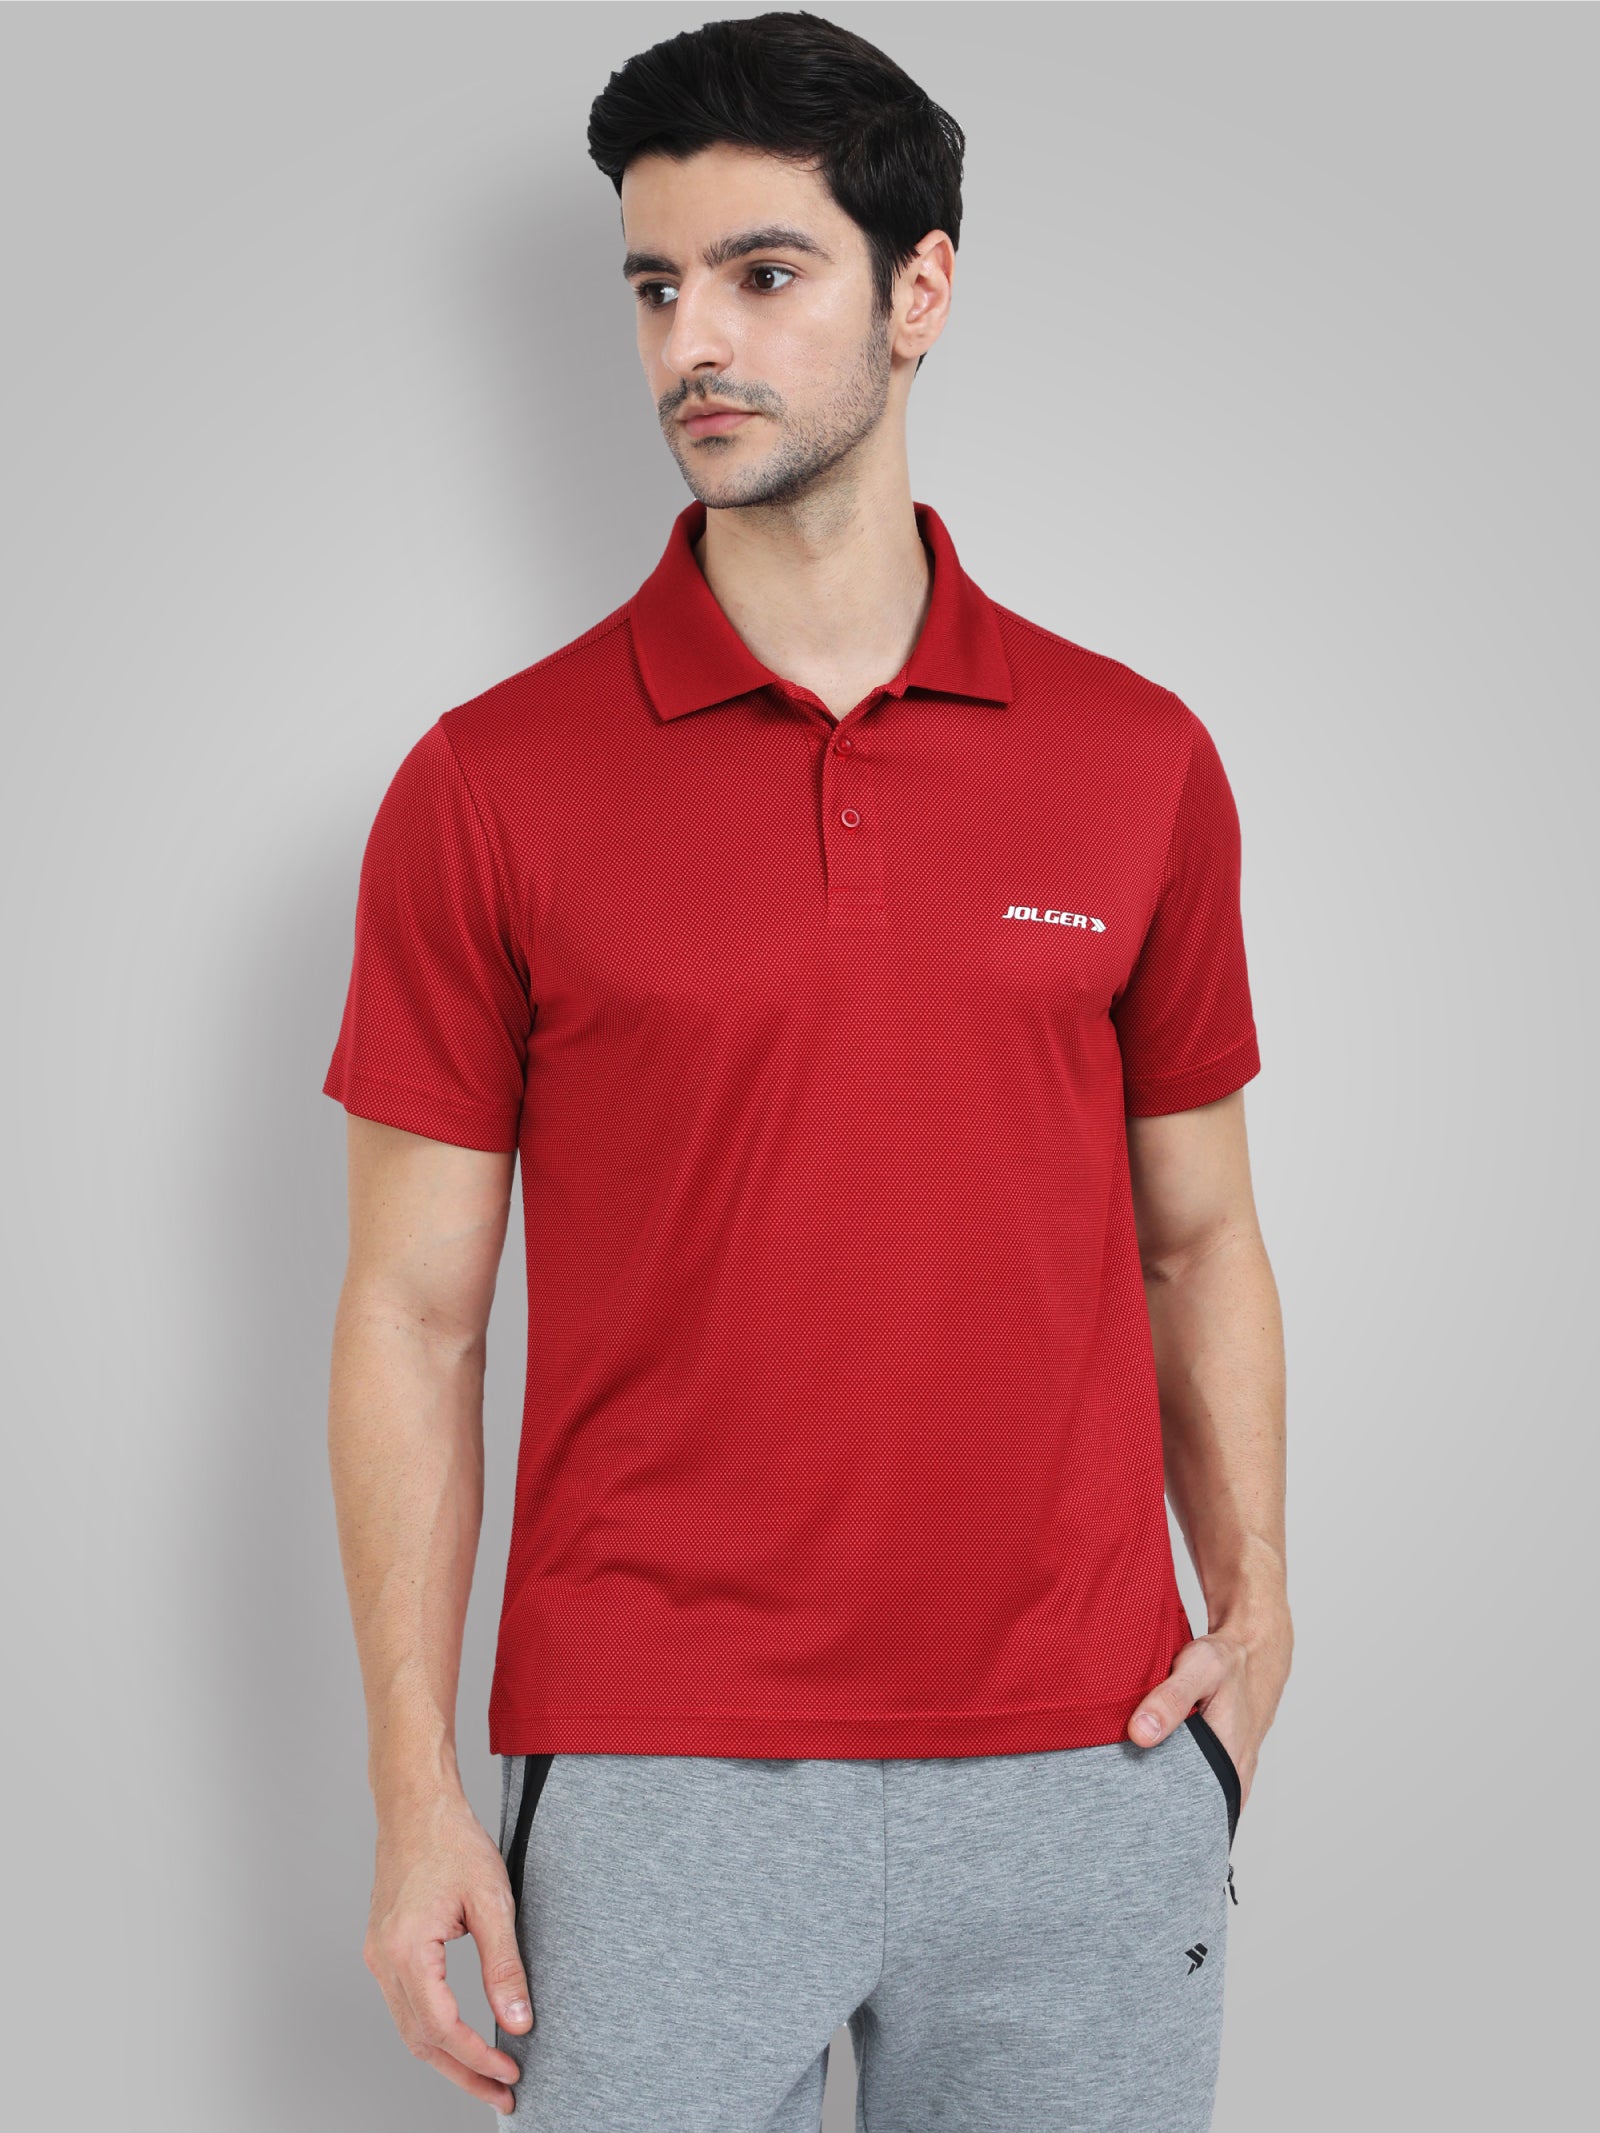 Men's Polo T shirts - Tshirts For Men Online - Maroon Color